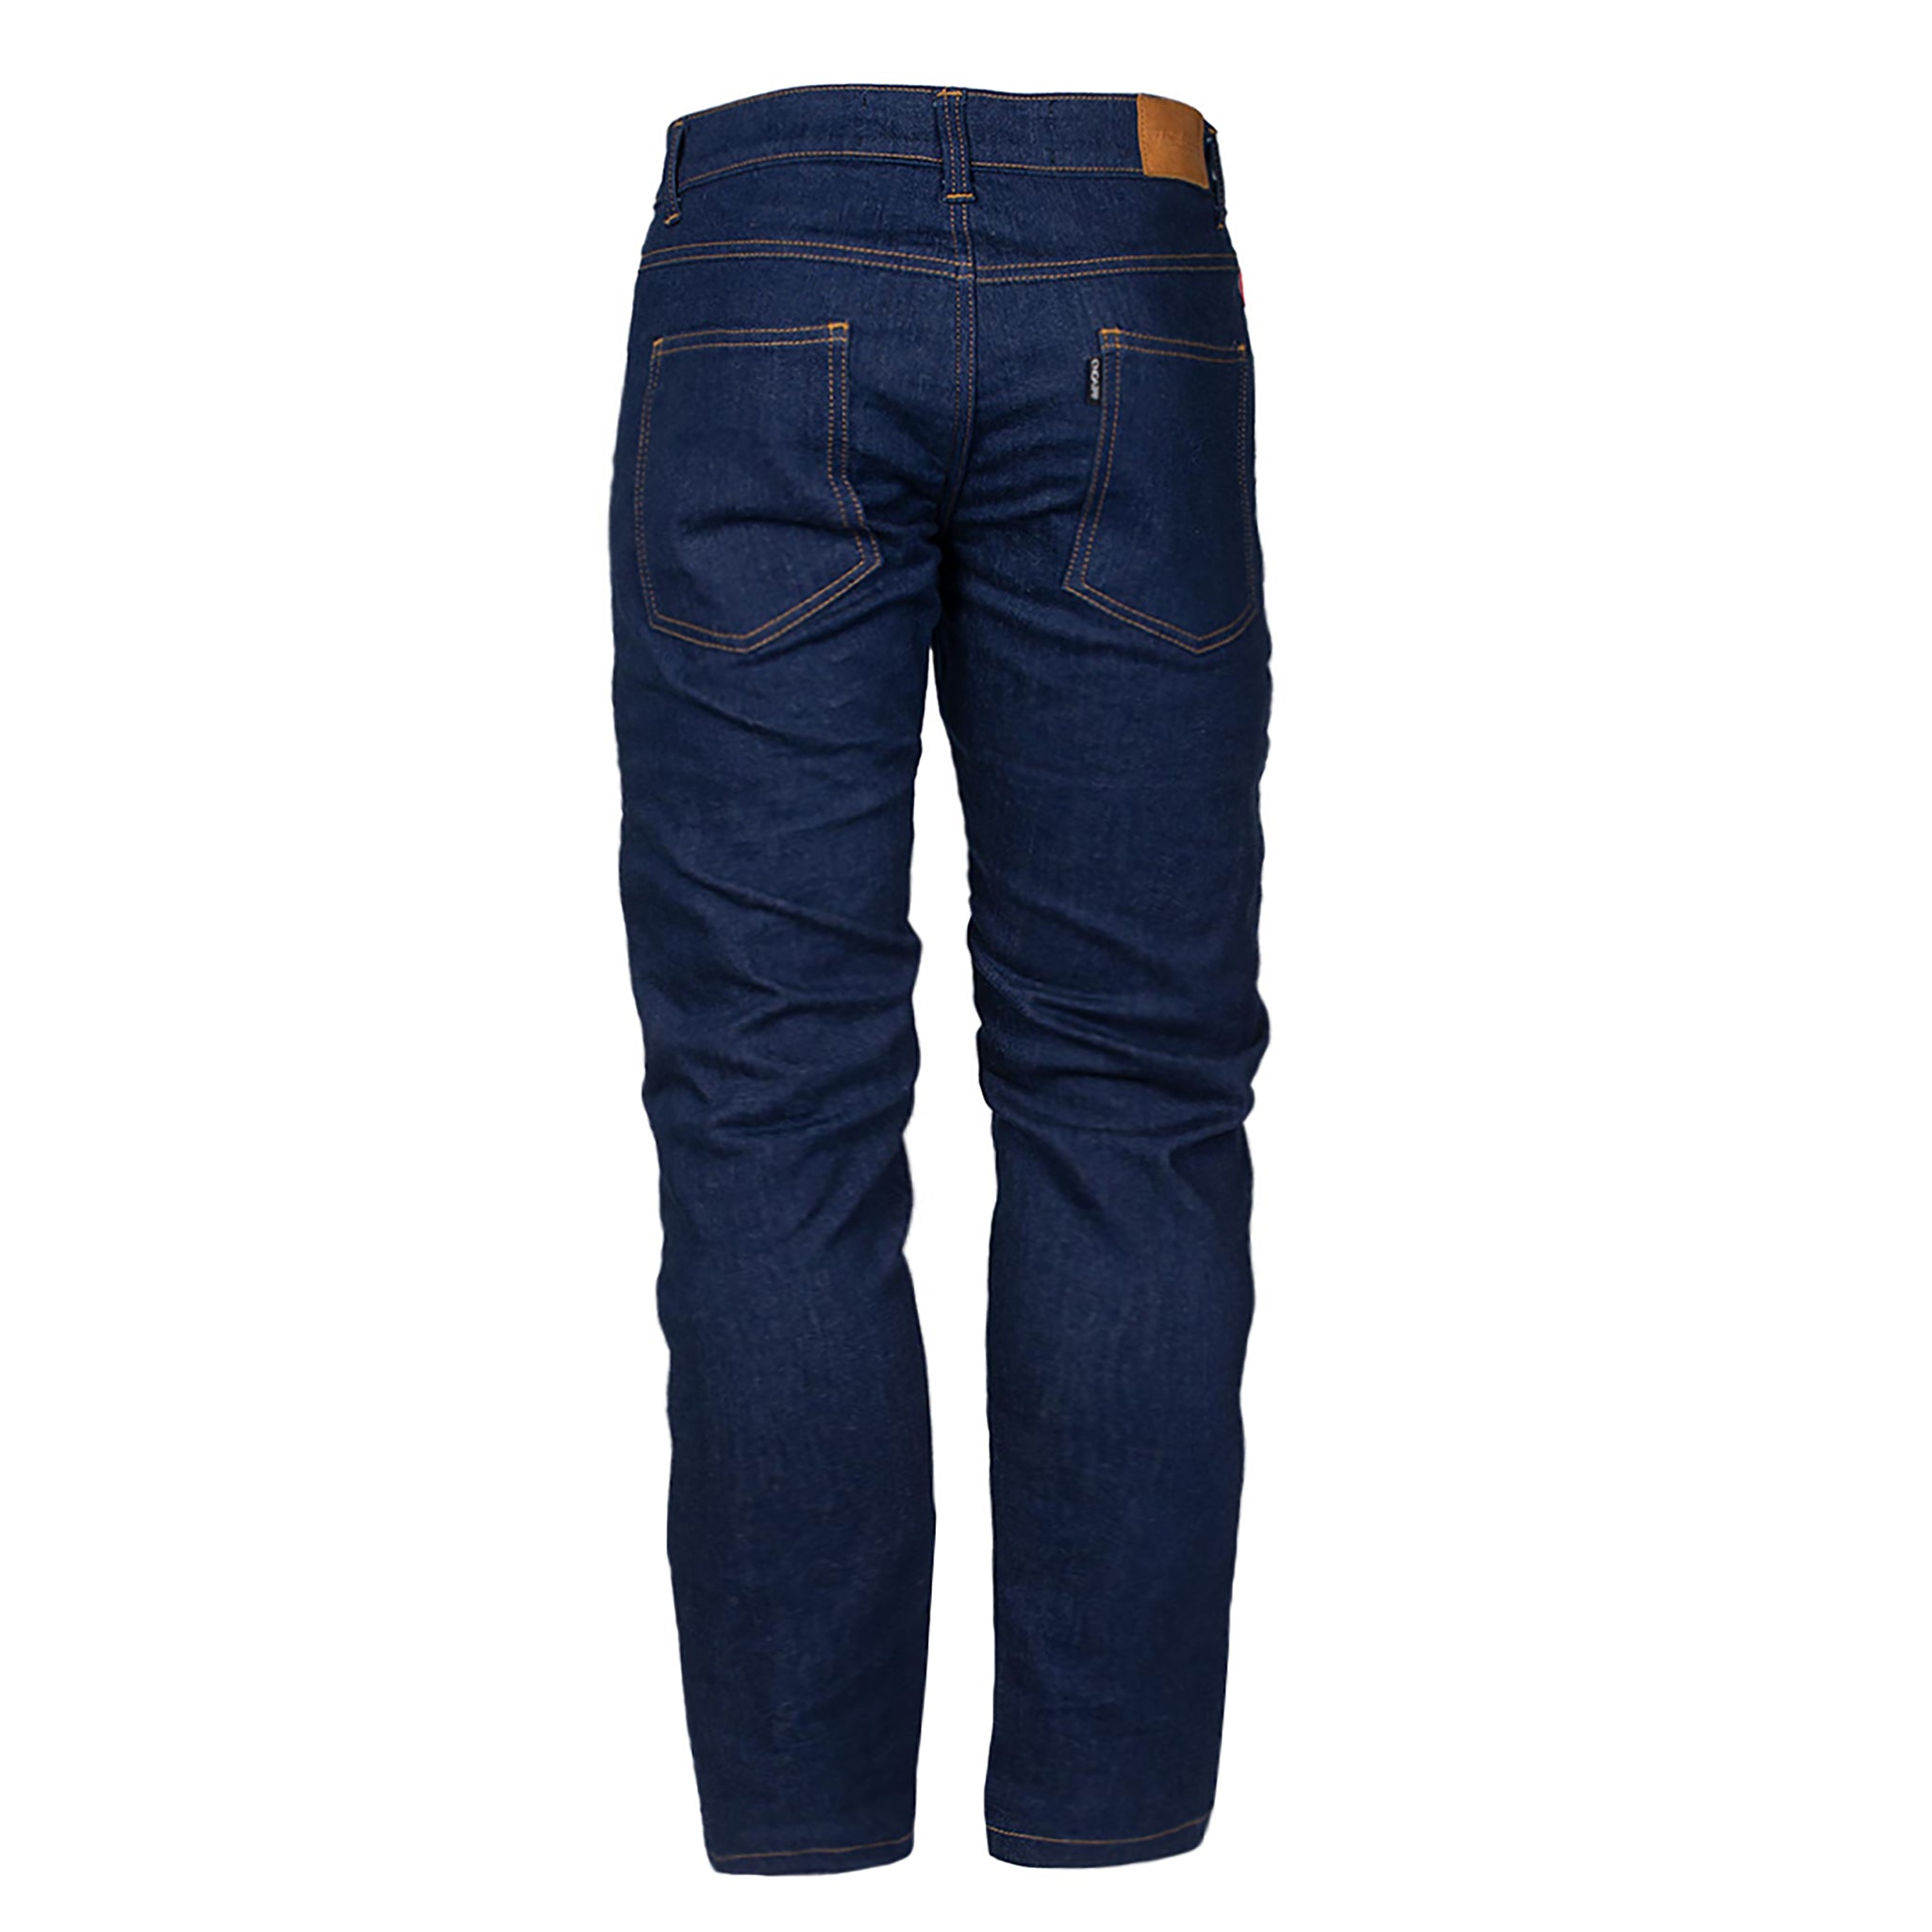 Relaxed Fit Protective Jeans - Blue